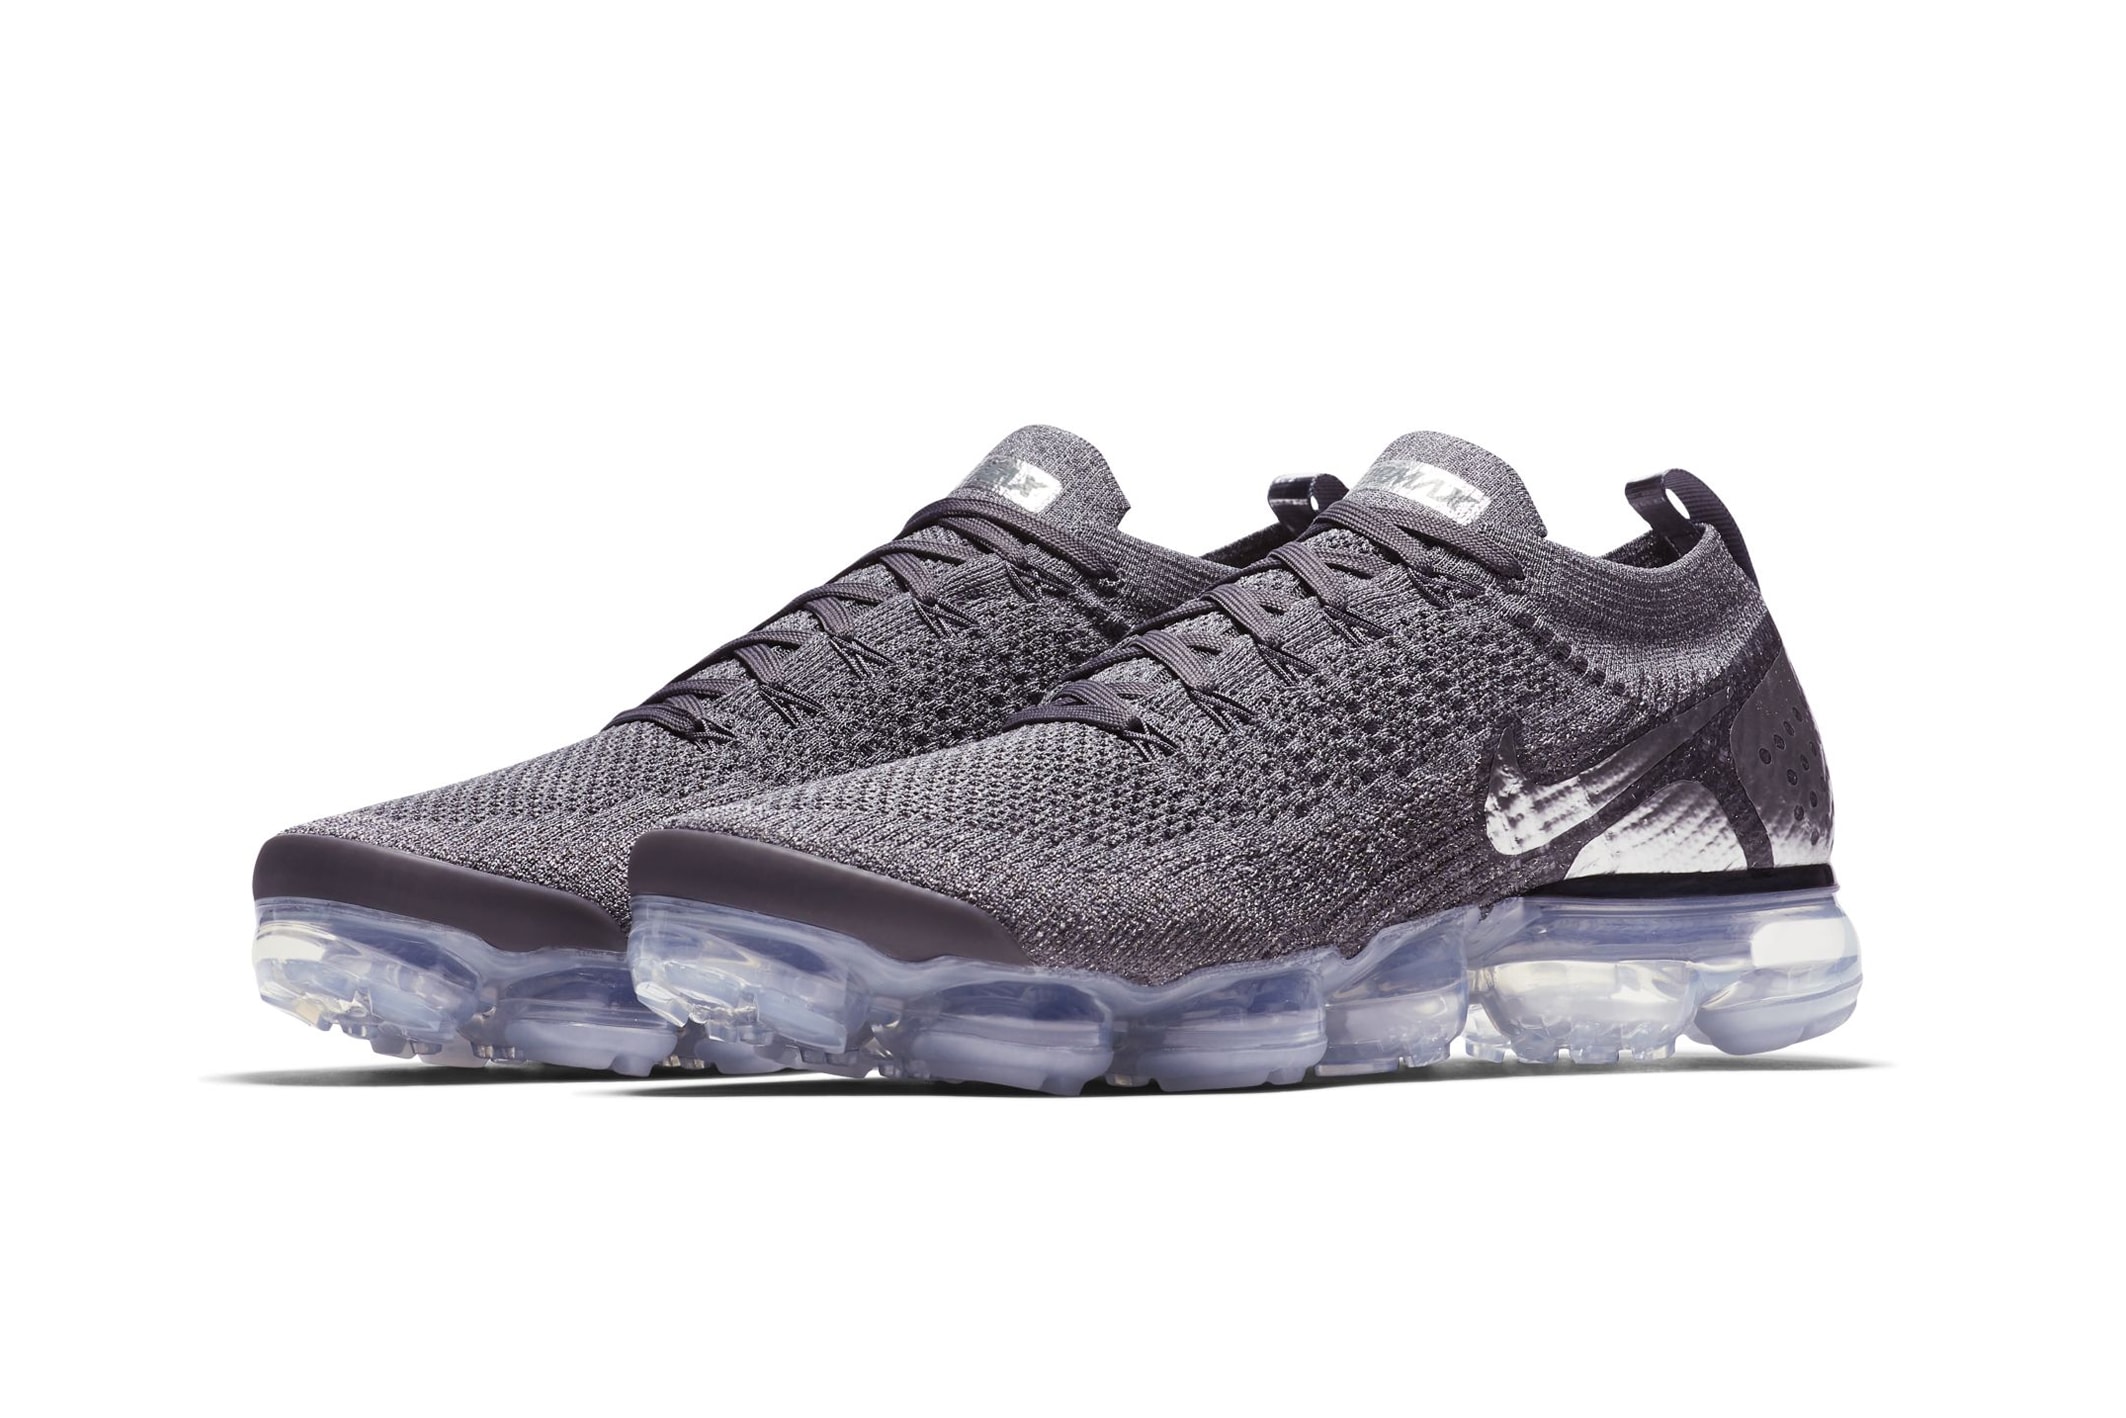 Nike Air VaporMax Flyknit 2.0 "Chrome" release date info price sneaker colorway purchase online